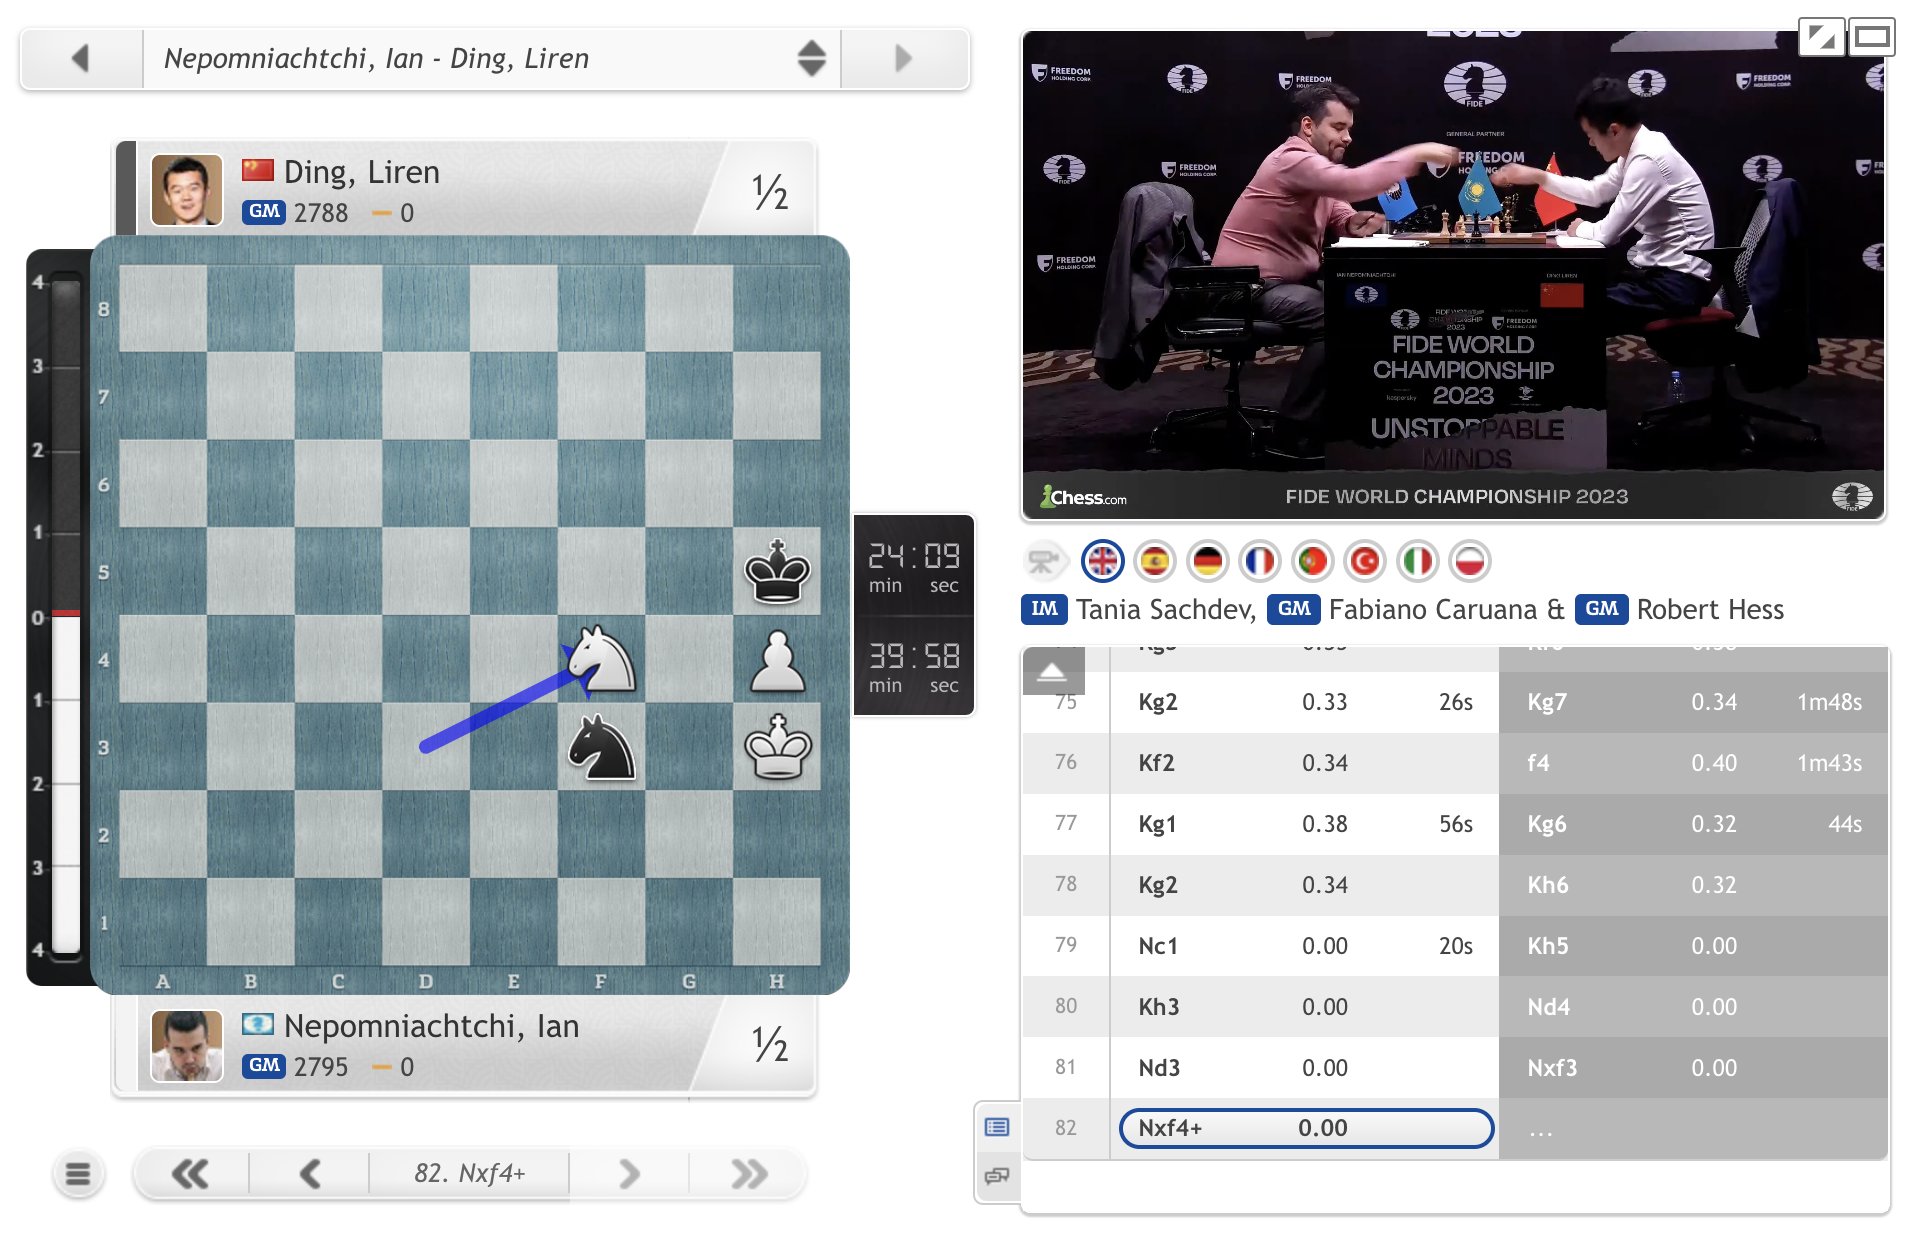 chess24.com on X: 6 hours, 82 moves and Game 9 of the #NepoDing match ends  in a draw, with Nepomniachtchi now leading 5:4 with 5 games to go!   #c24live  /